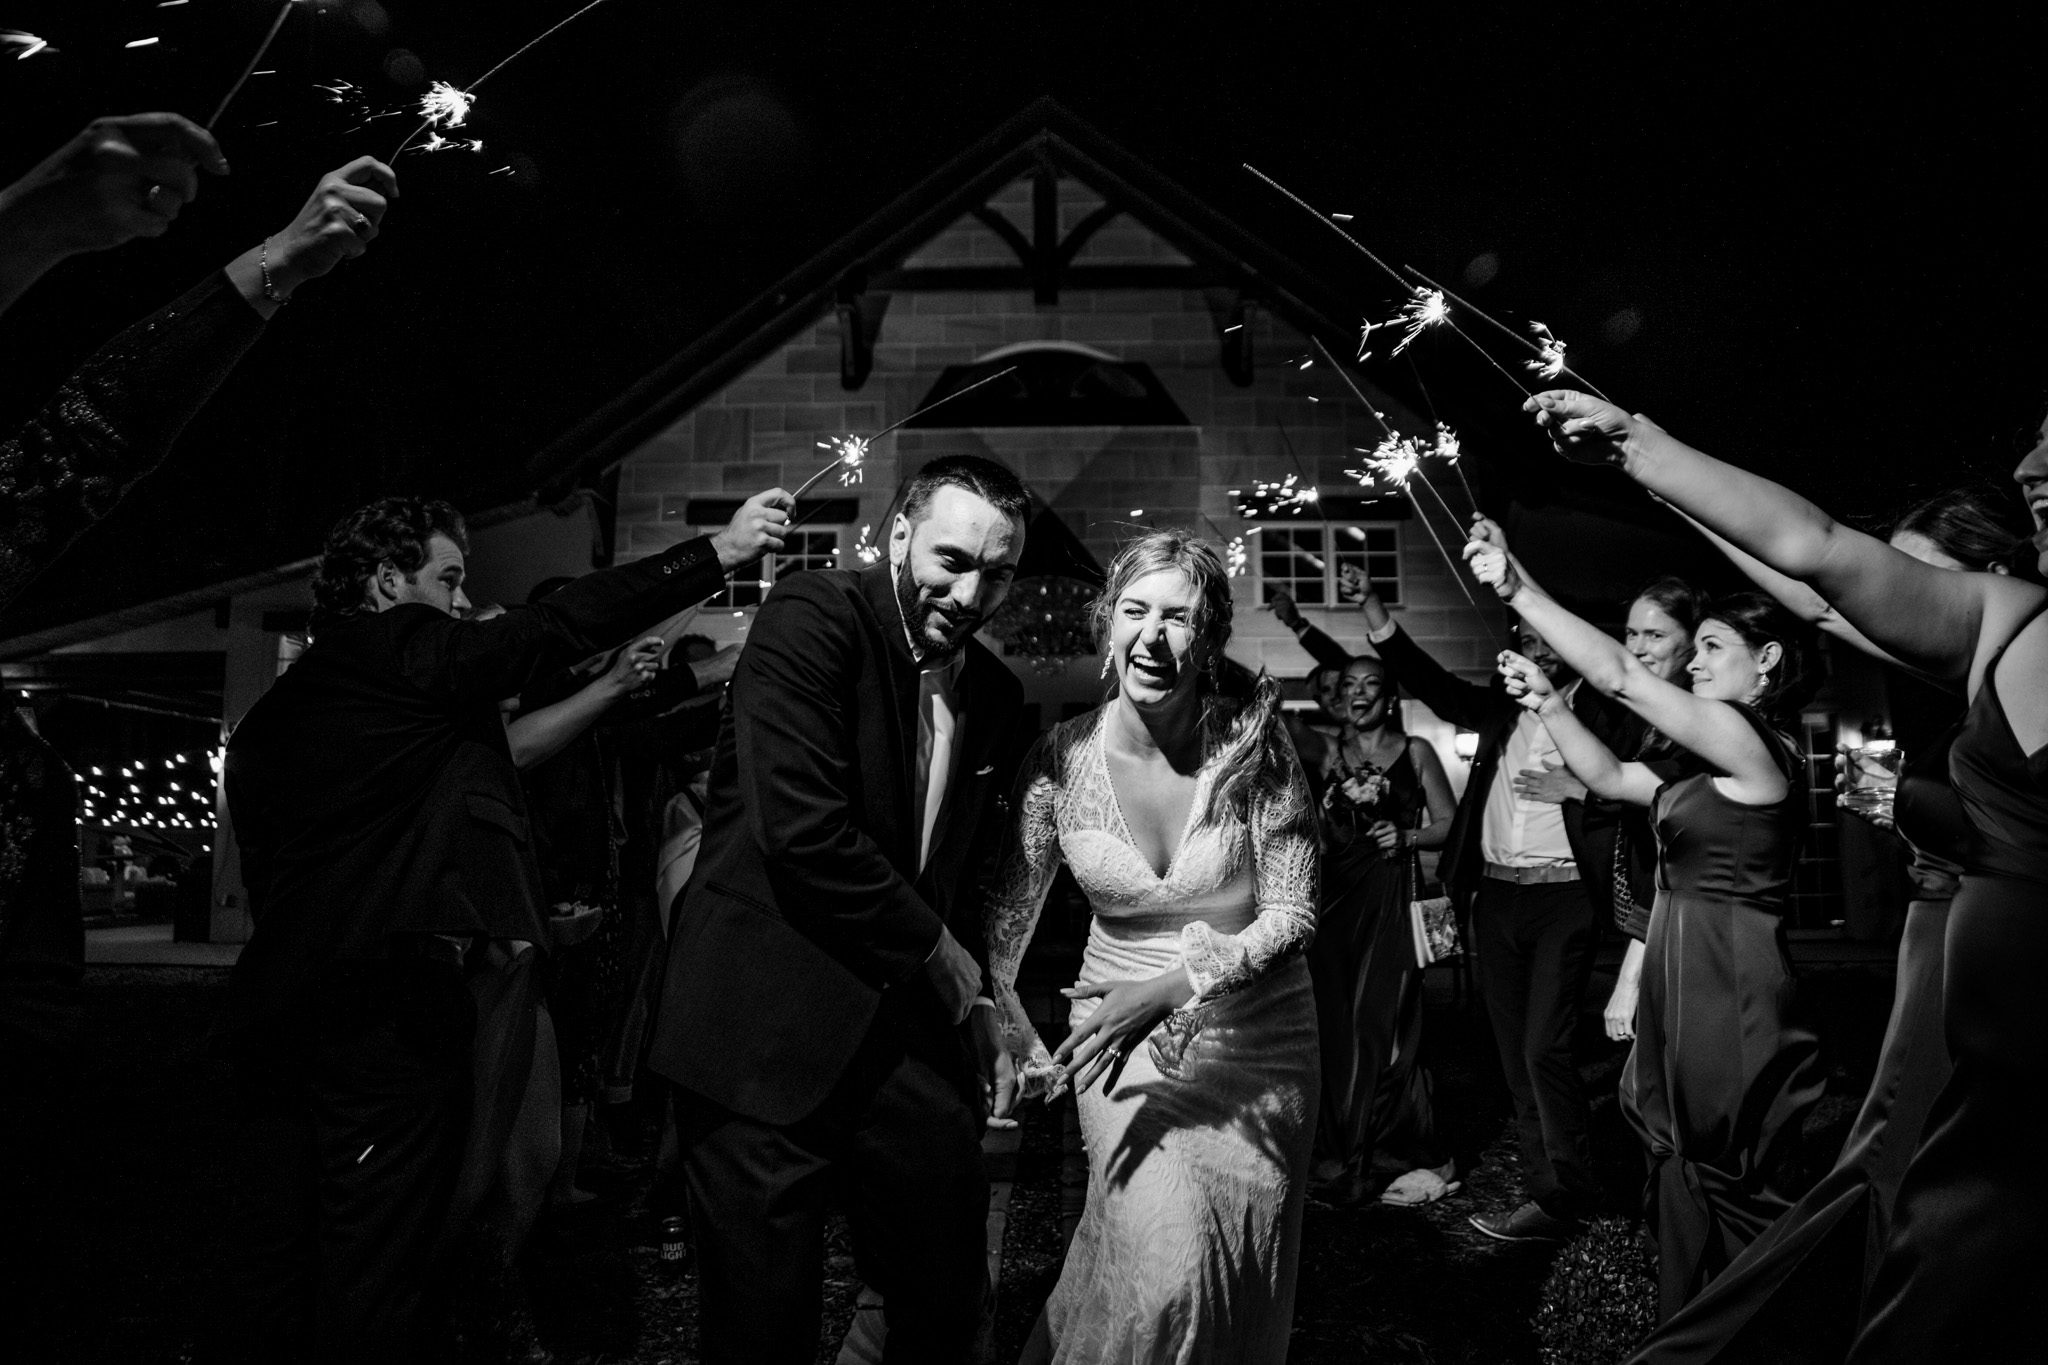 An exquisite Asheville wedding photographer captures a blissful bride and groom with sparklers on their special day.